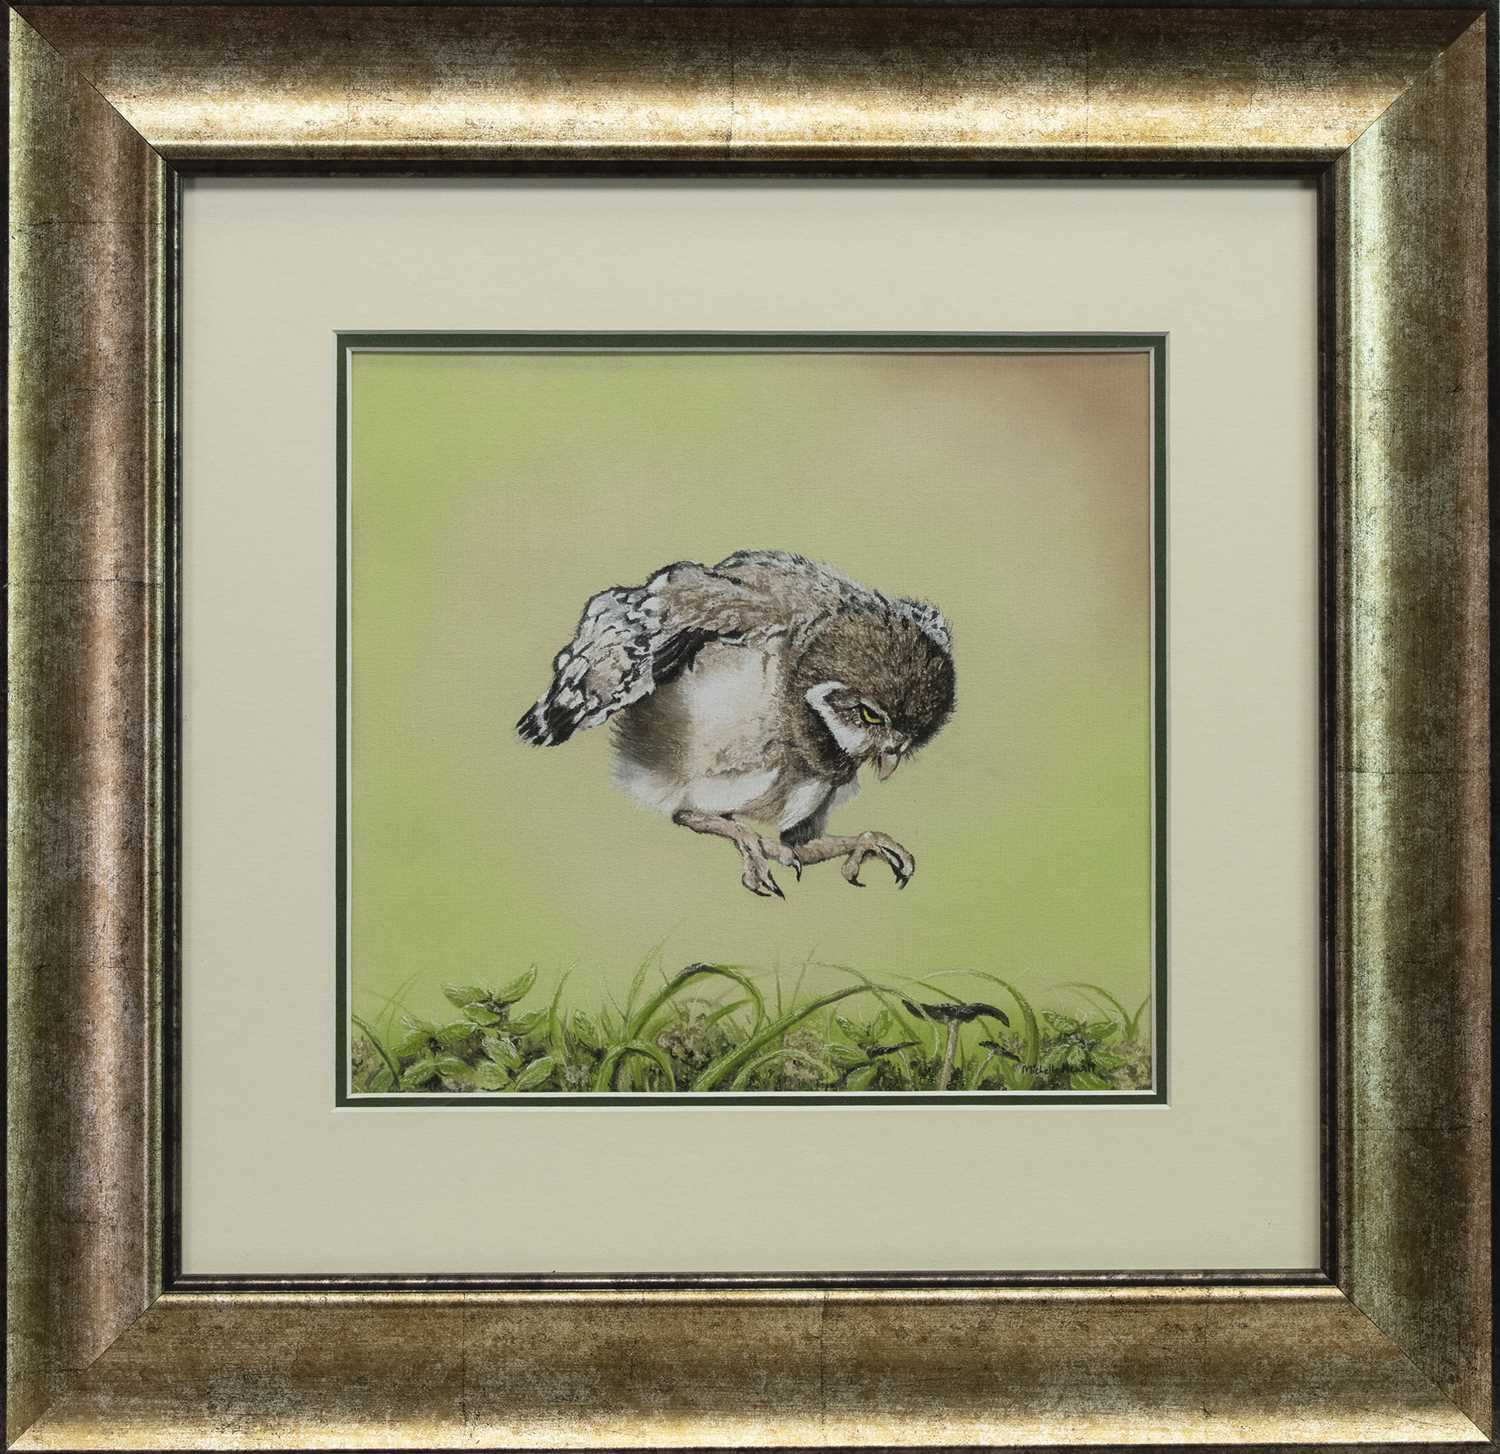 Lot 493 - POUNCE!, A PASTEL BY MICHELLE HEWITT